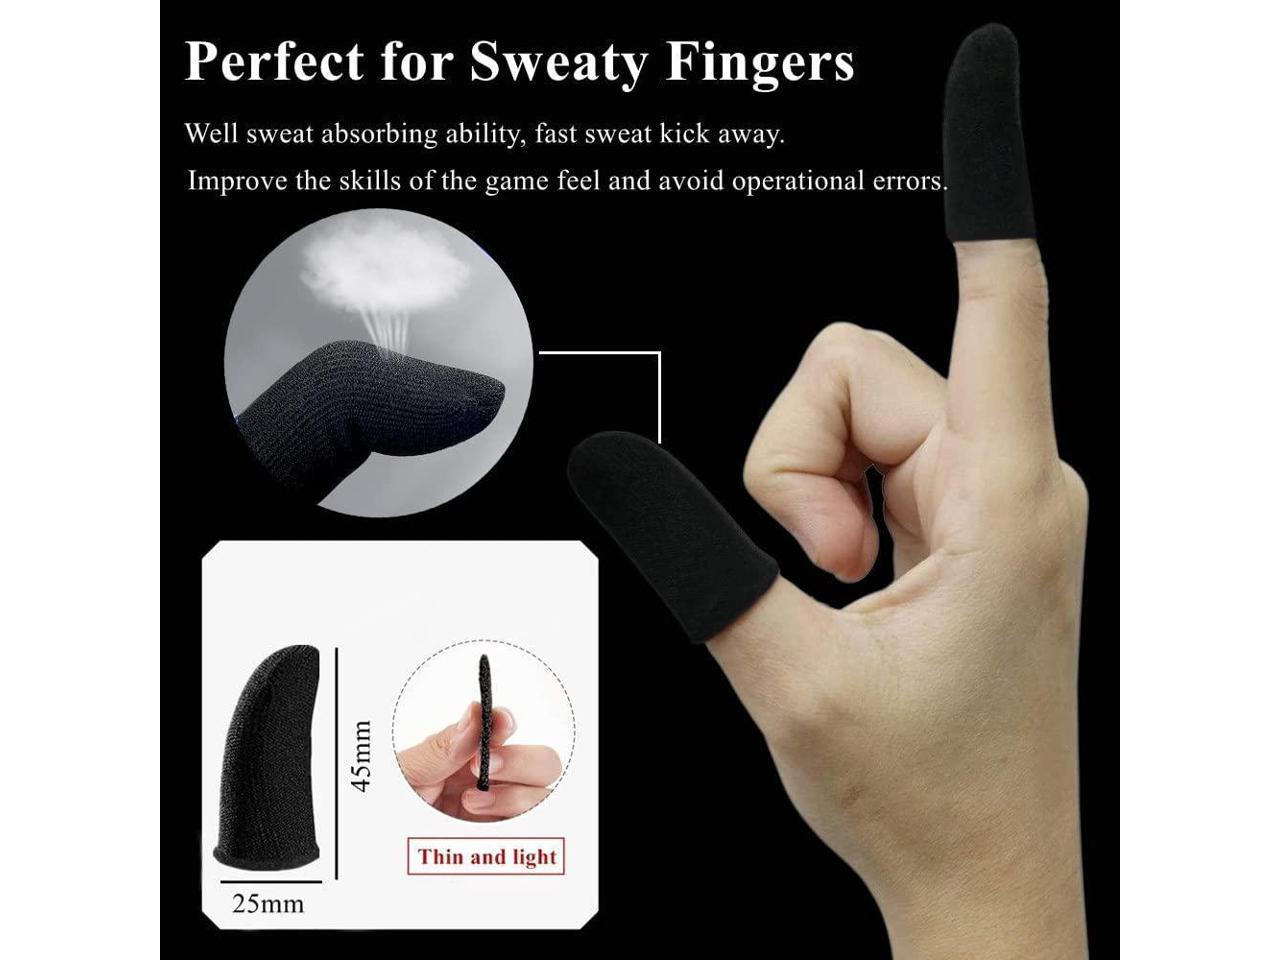 Rules of Survival Anti-Sweat Breathable Thumb Finger Sleeve for League of Legend Silver Fiber Blue Stripe Gaming Gloves for Sweaty Hands Finger Sleeves for Mobile Game Controllers PUBG Pack of 2 